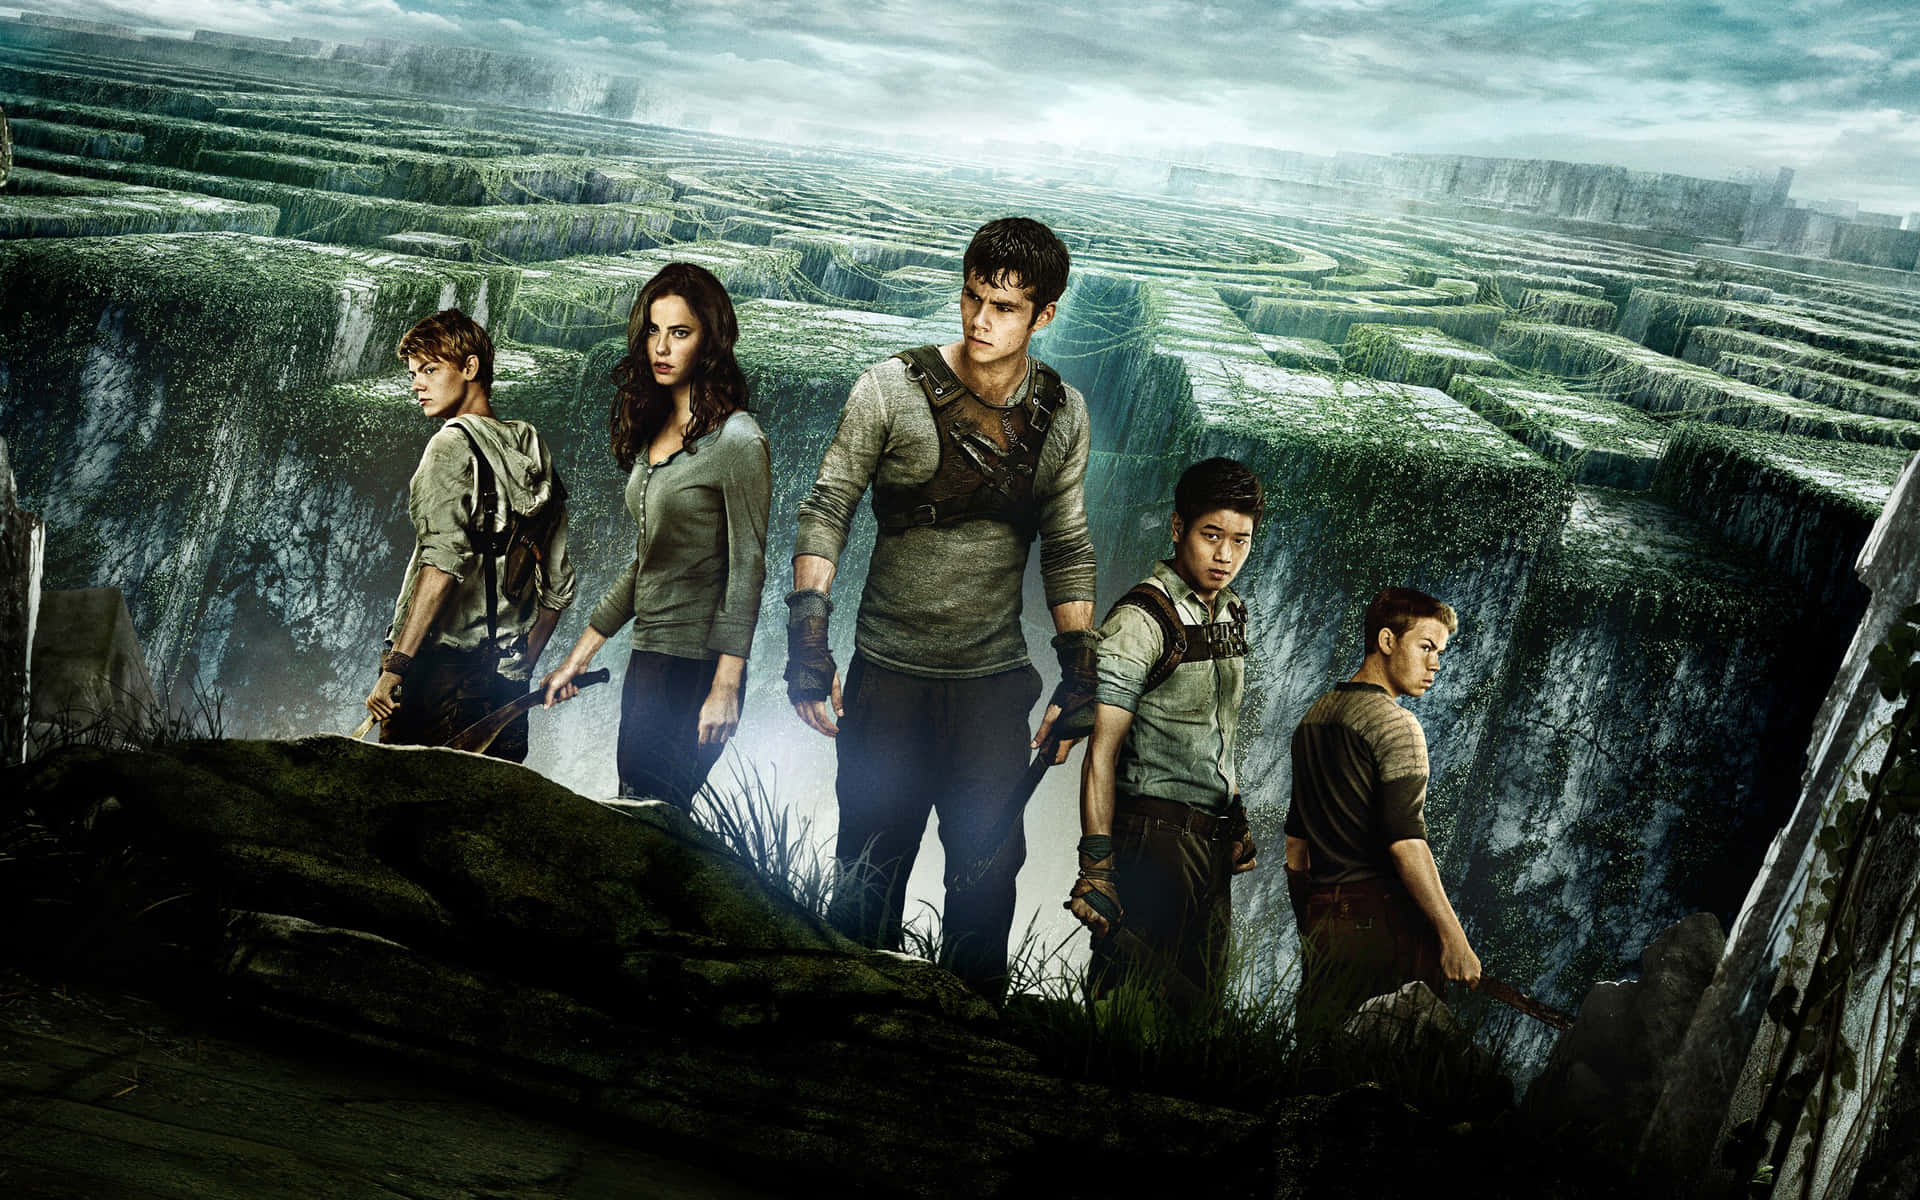 Thomas and his fellow Gladers challenging the Maze in the epic Maze Runner saga